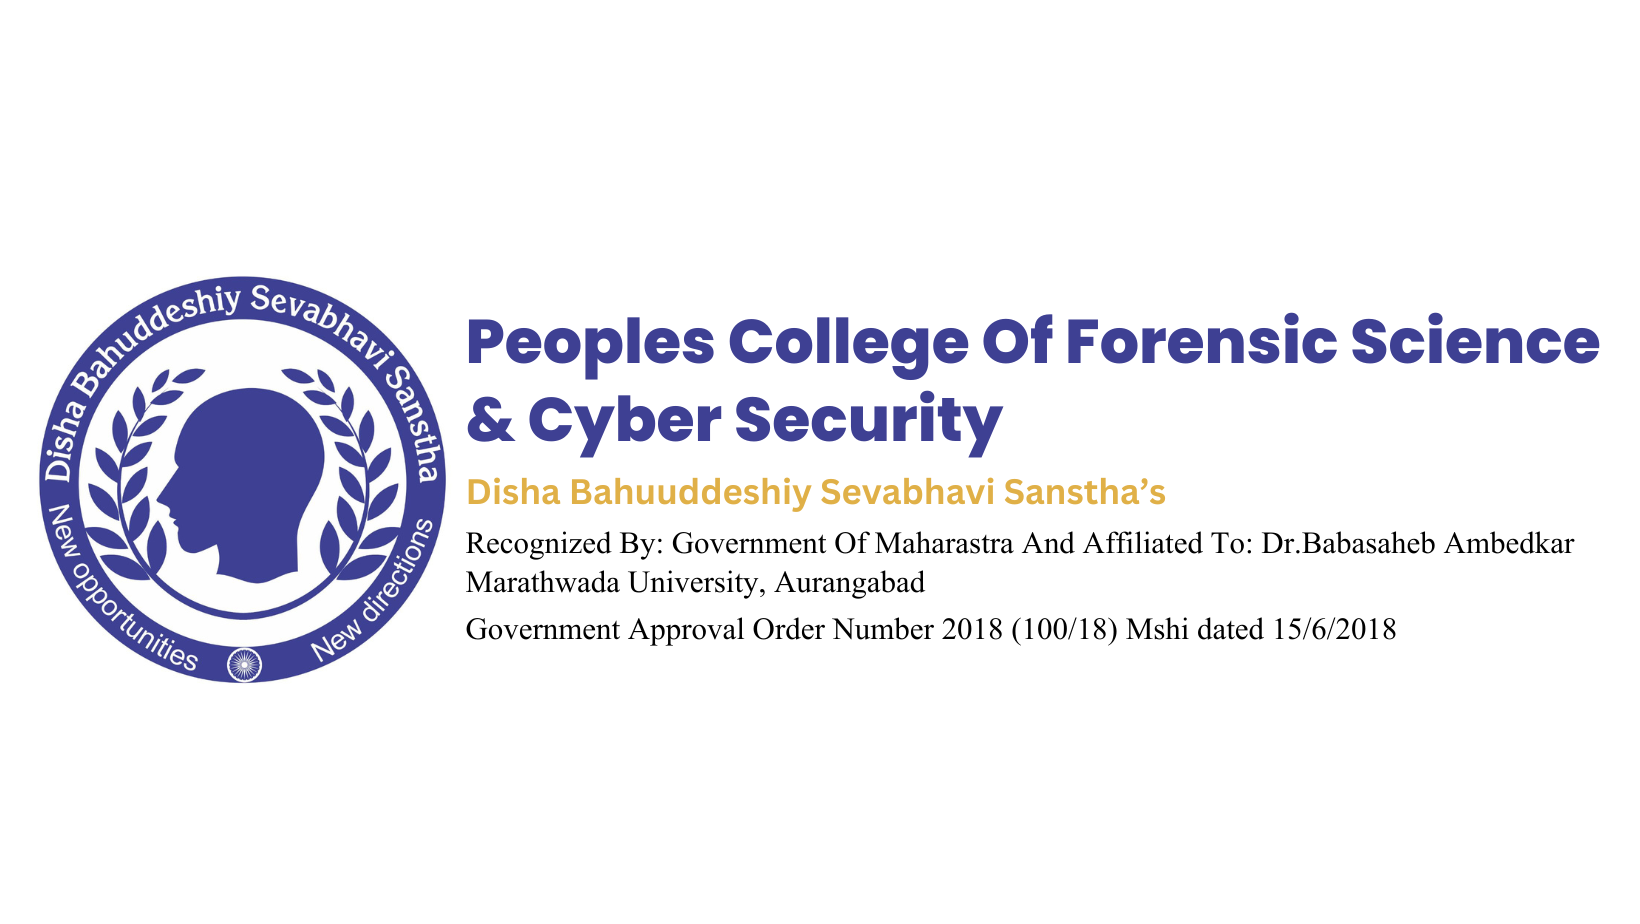 Peoples College Of Forensic Science & Cyber Security